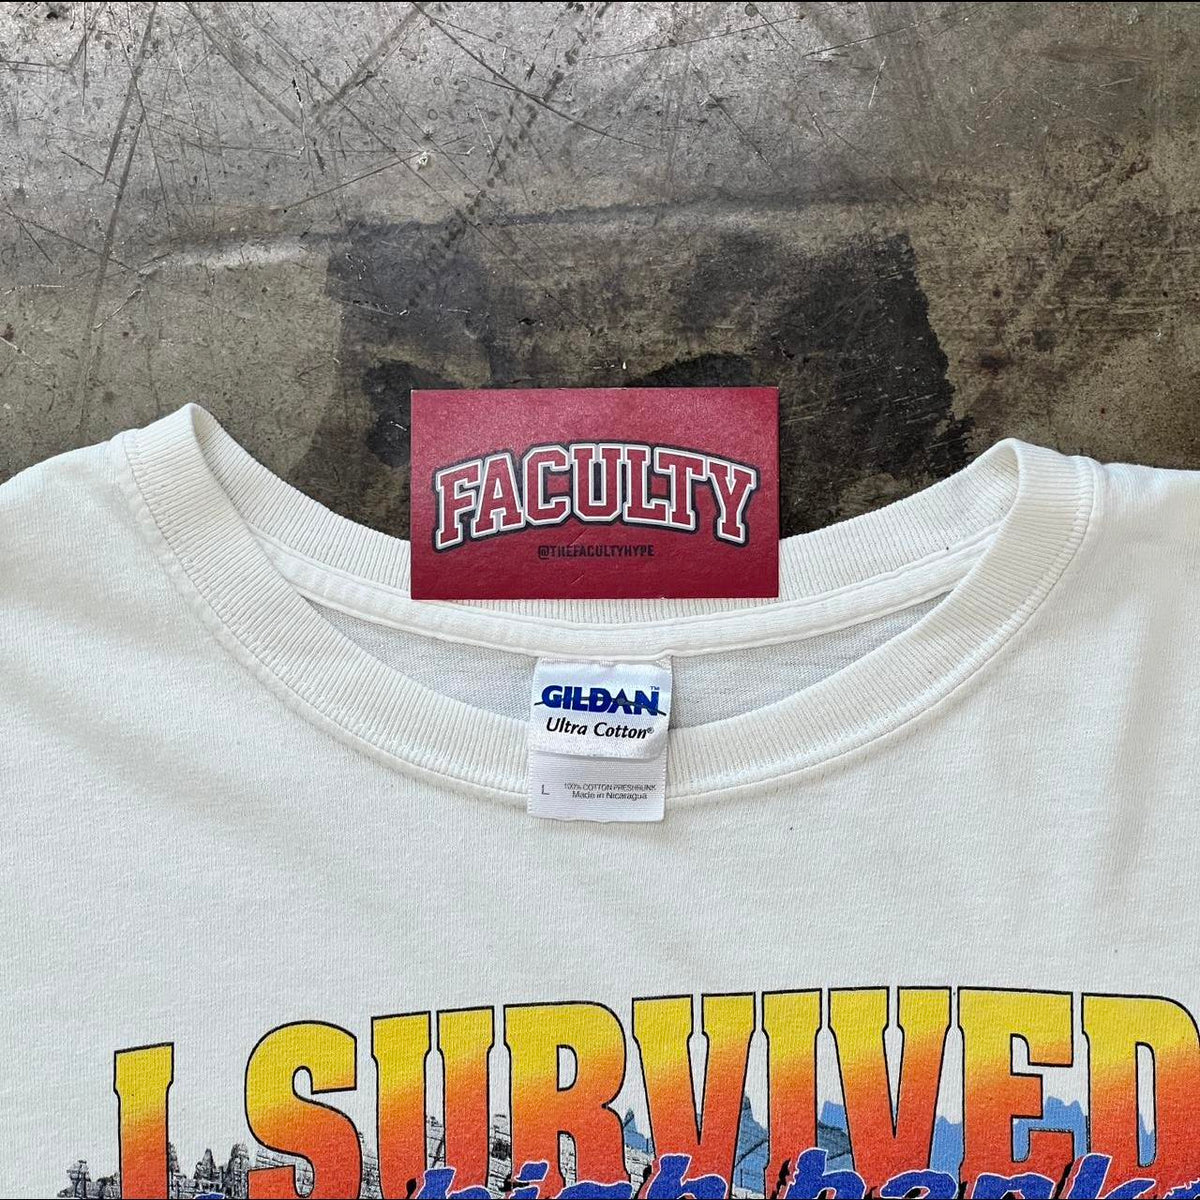 'I Survived the High Banks' Texas Motor Speedway Tee